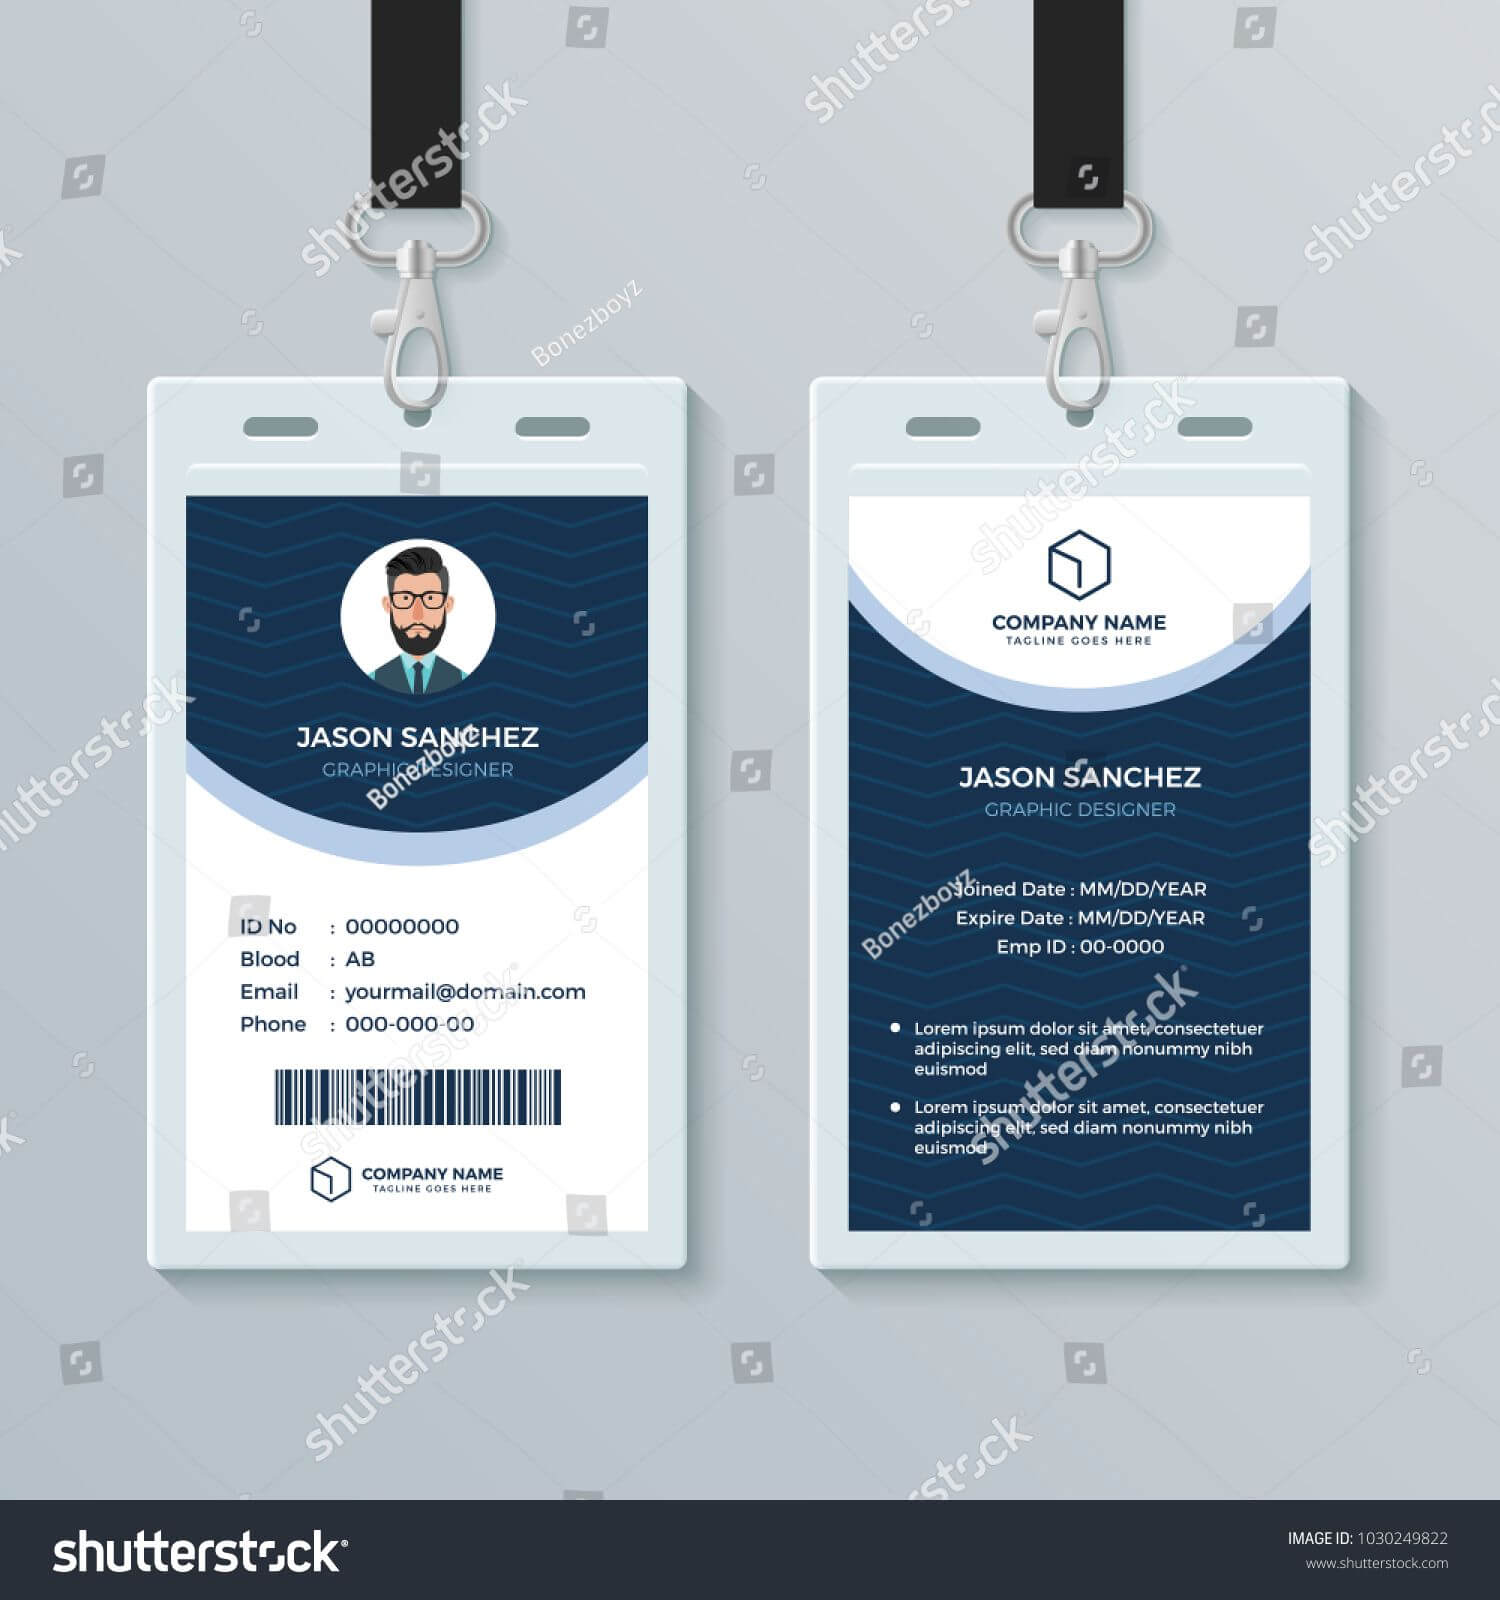 This Id Card Template Perfect For Any Types Of Agency Intended For Work Id Card Template